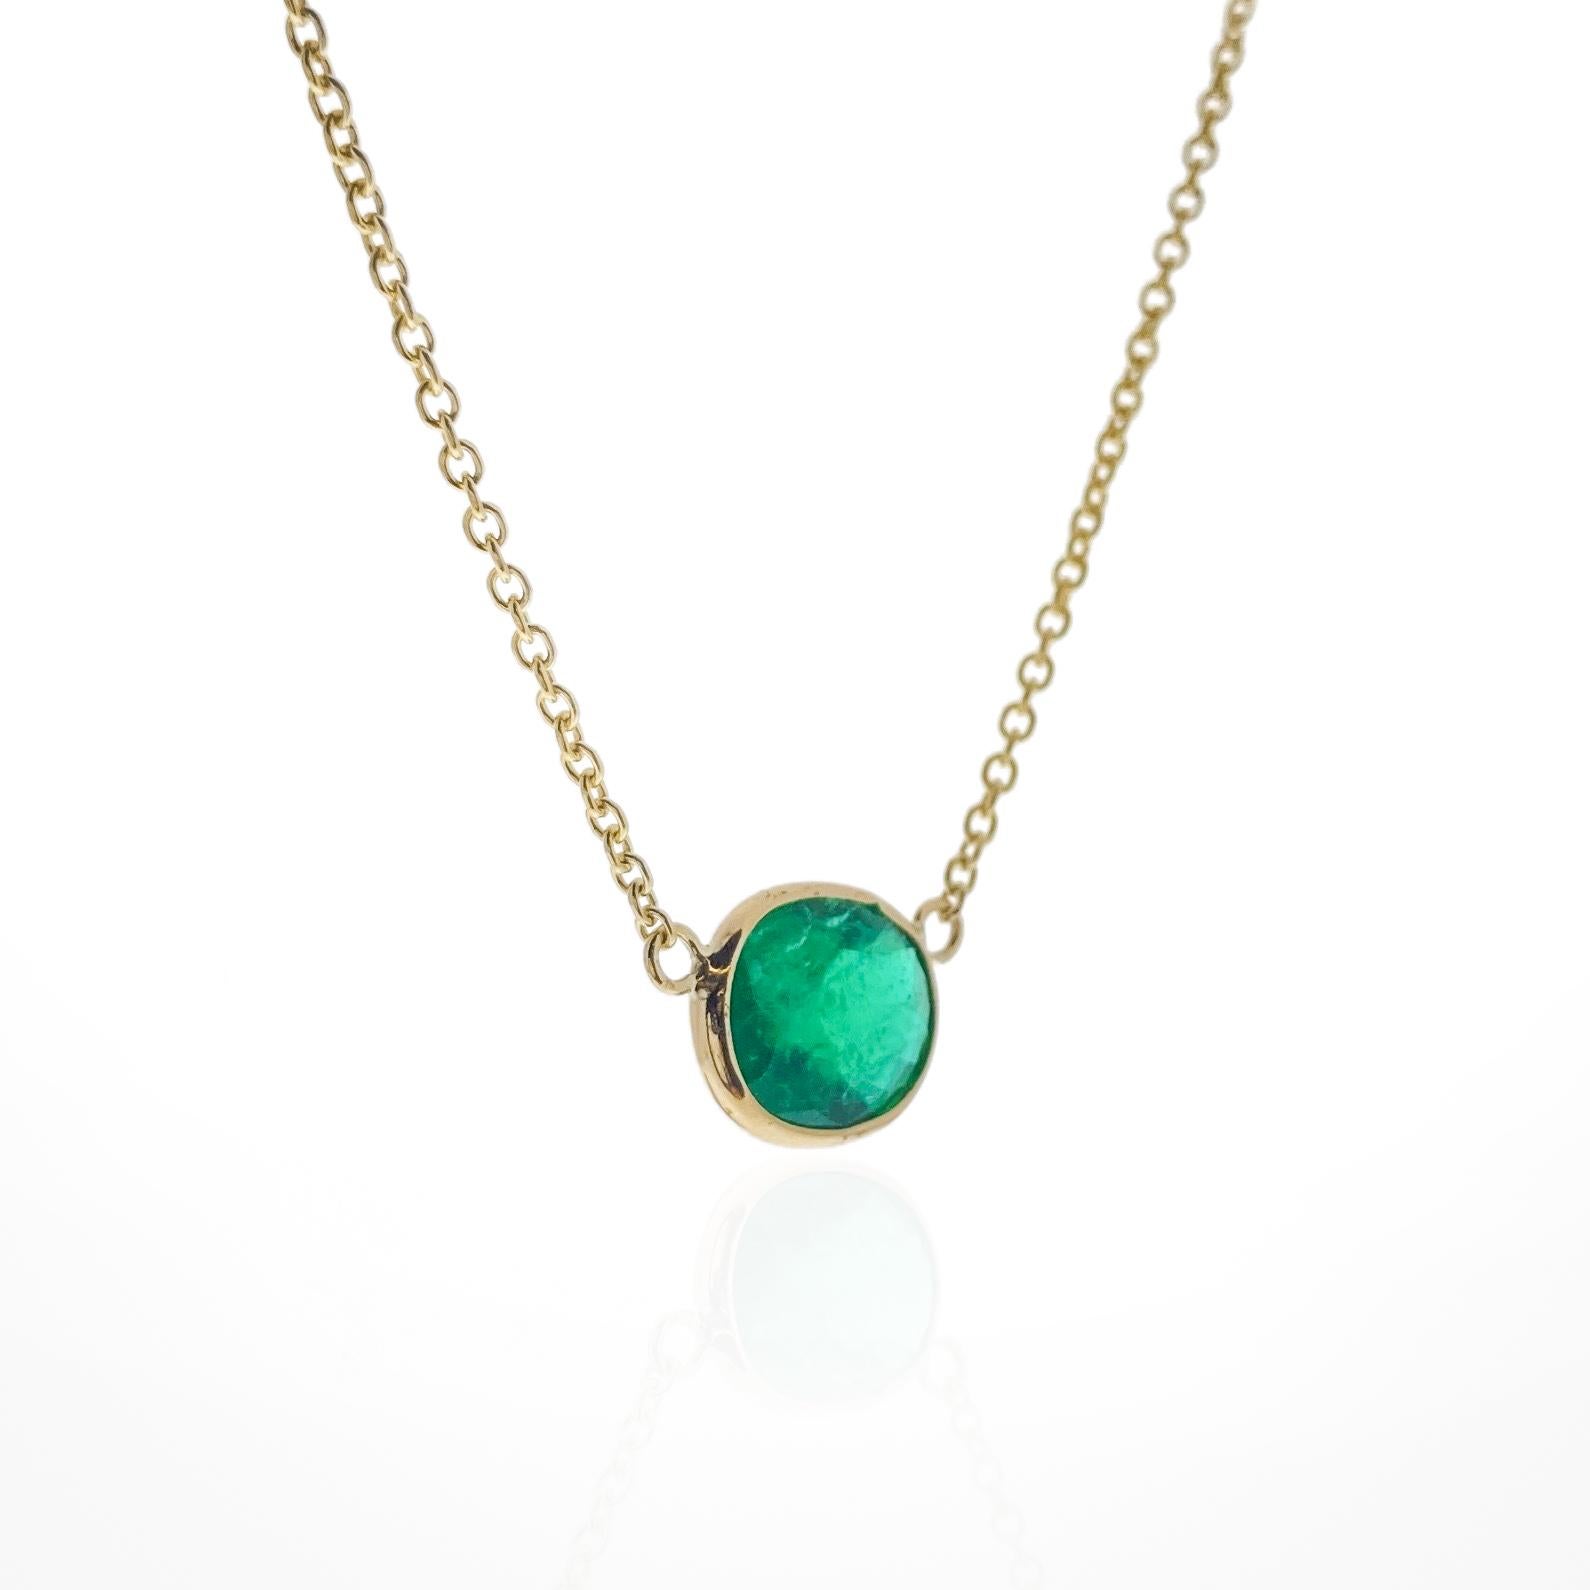 Contemporary 1.64 Carat Green Emerald Oval Cut Fashion Necklaces In 14K Yellow Gold For Sale